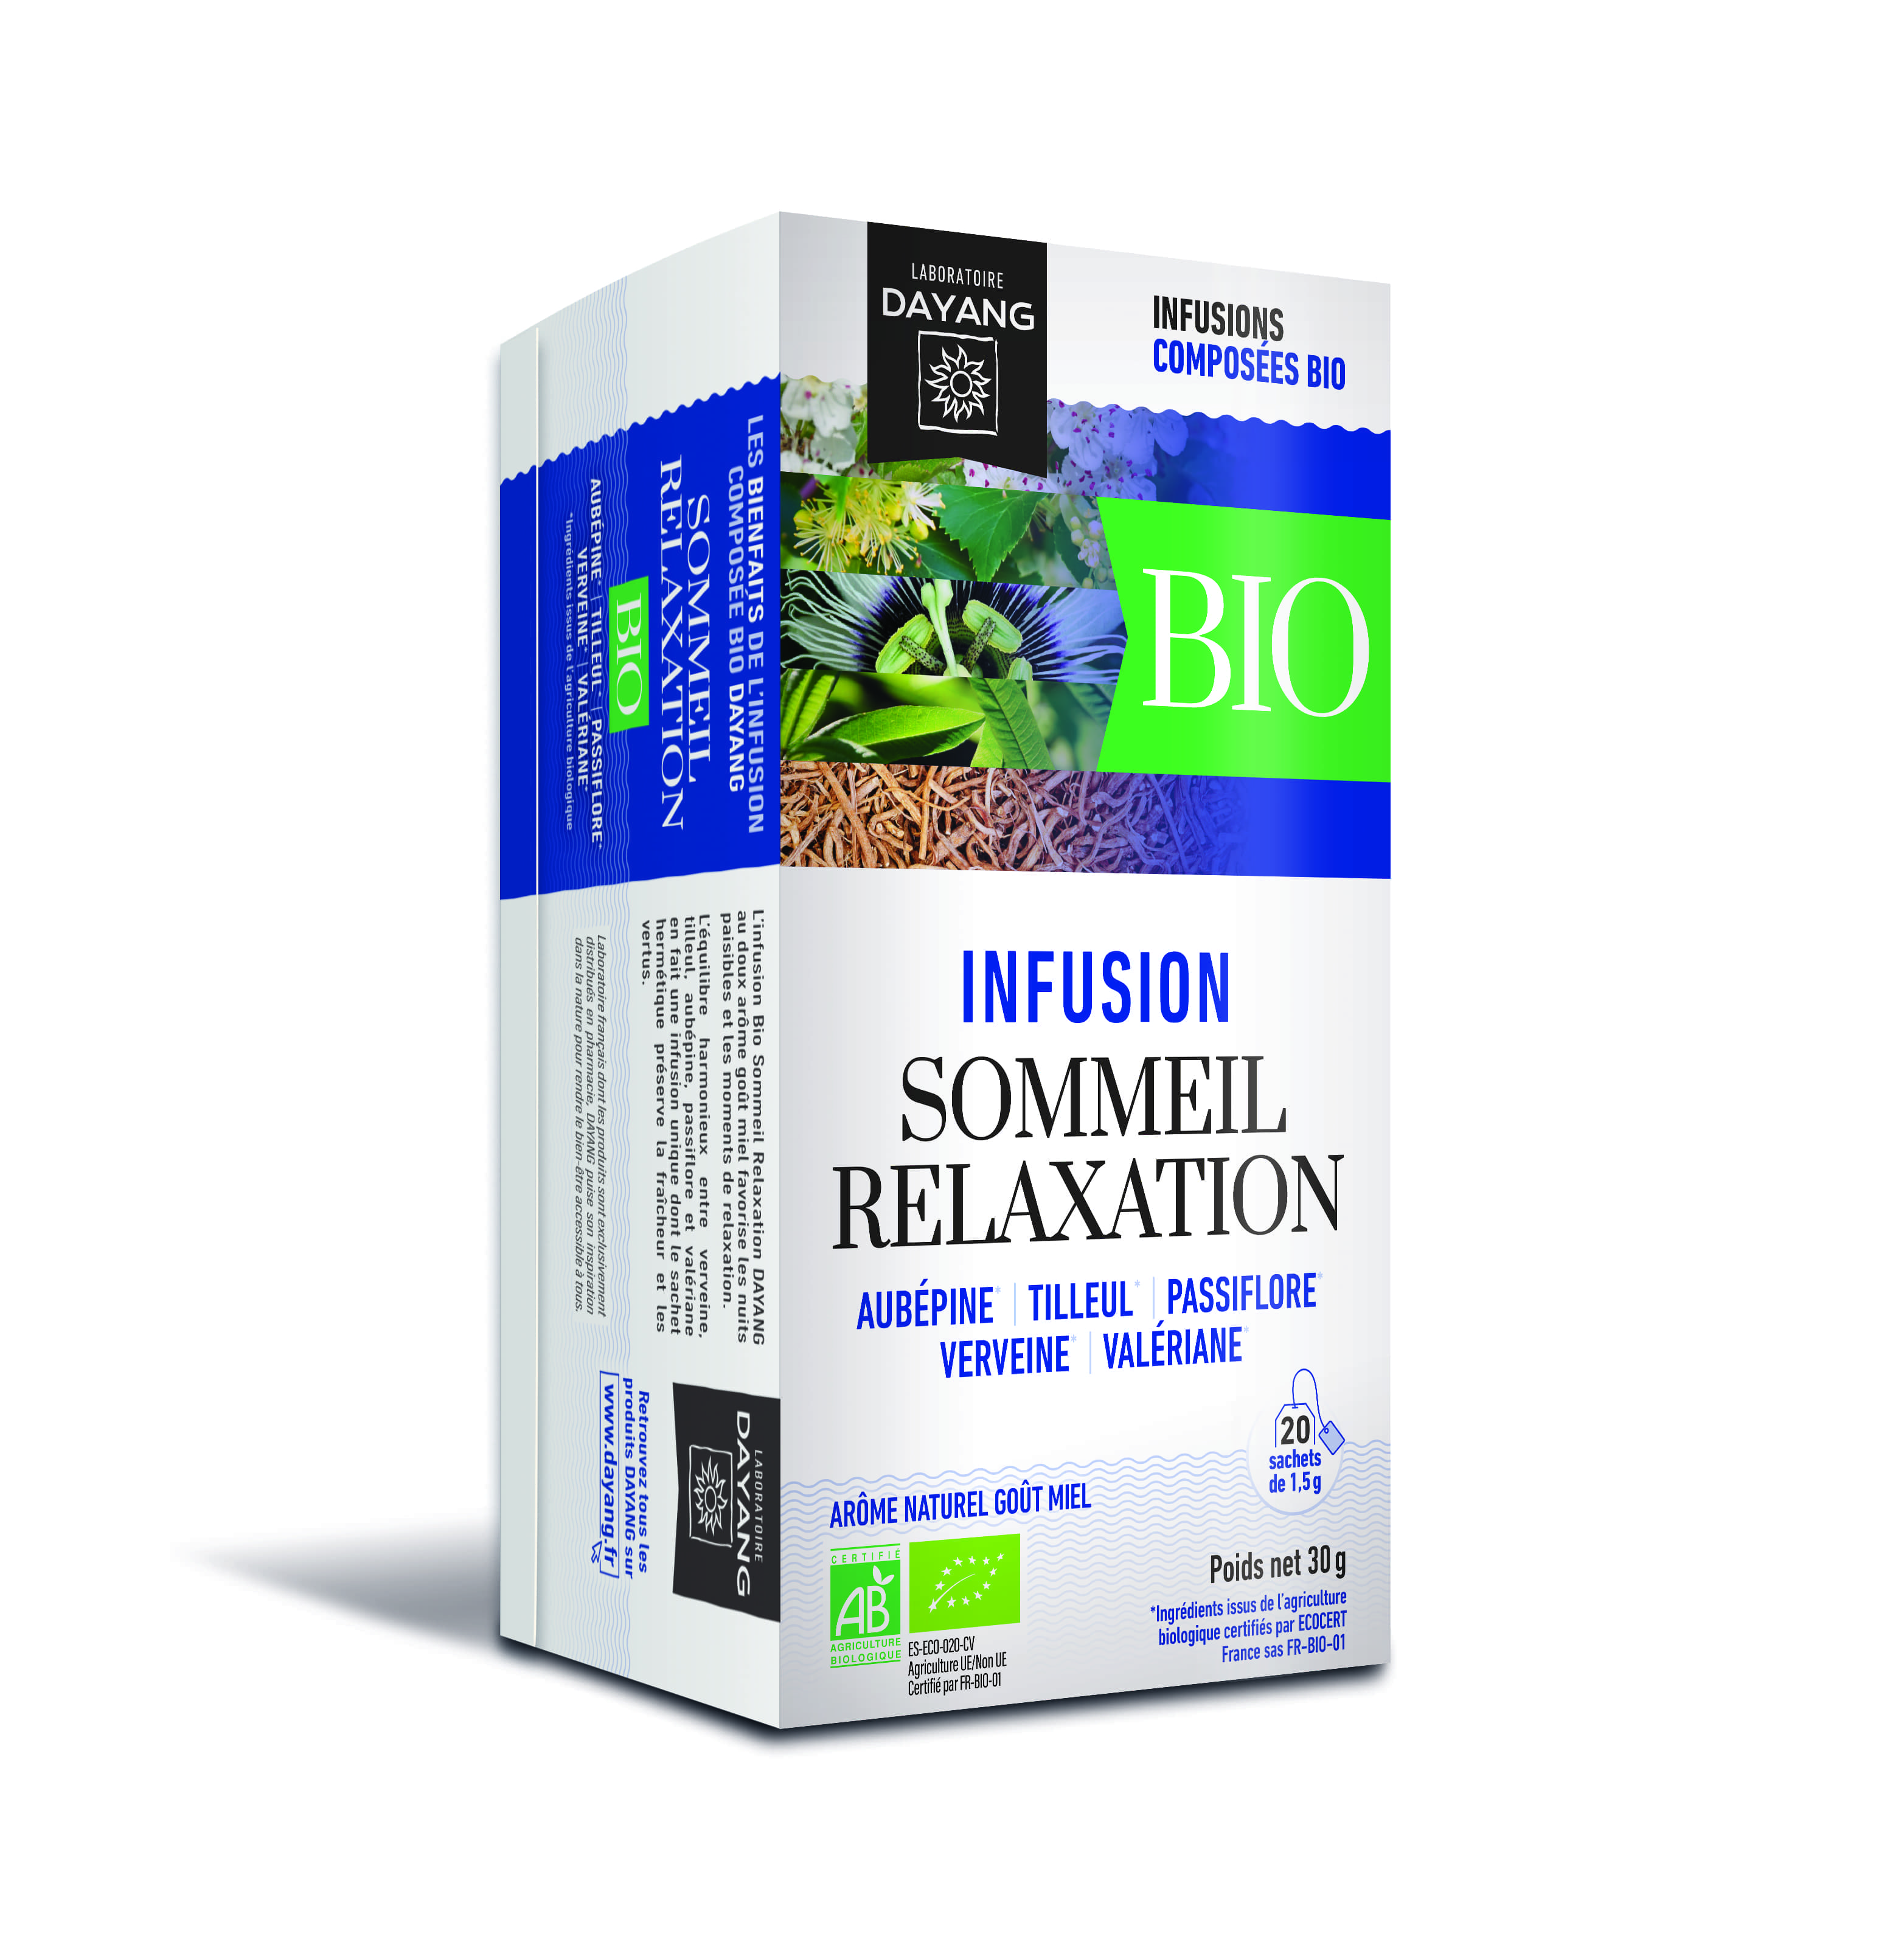 Infusion Bio sommeil relaxation Dayang